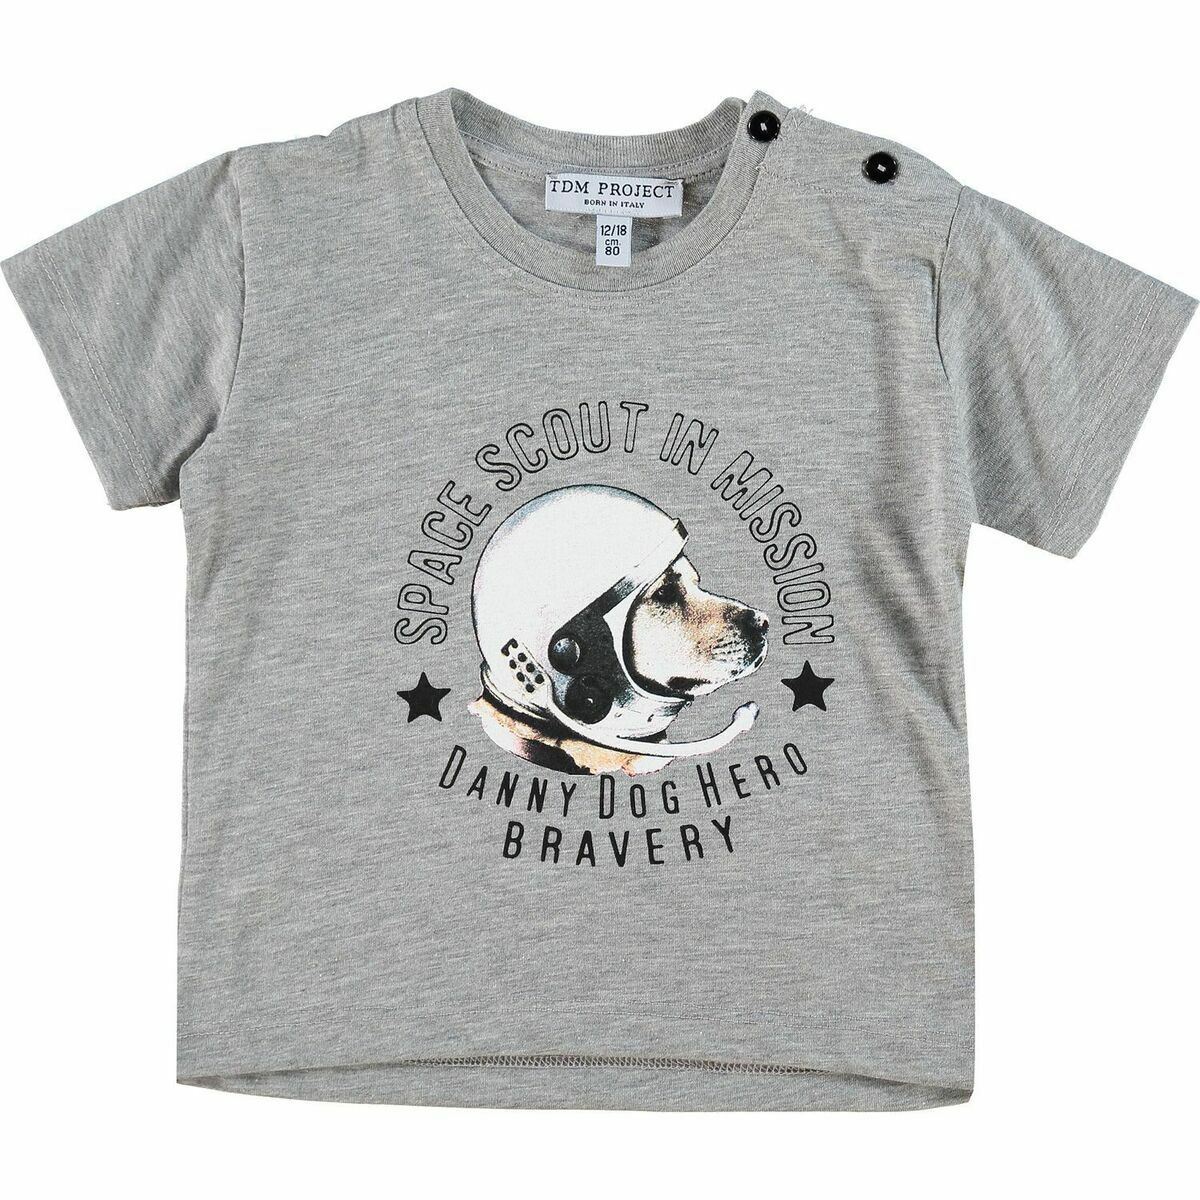 TDM Project Baby Boys' Grey Graphic T-Shirt sizes 12 m 18 m & 24 months